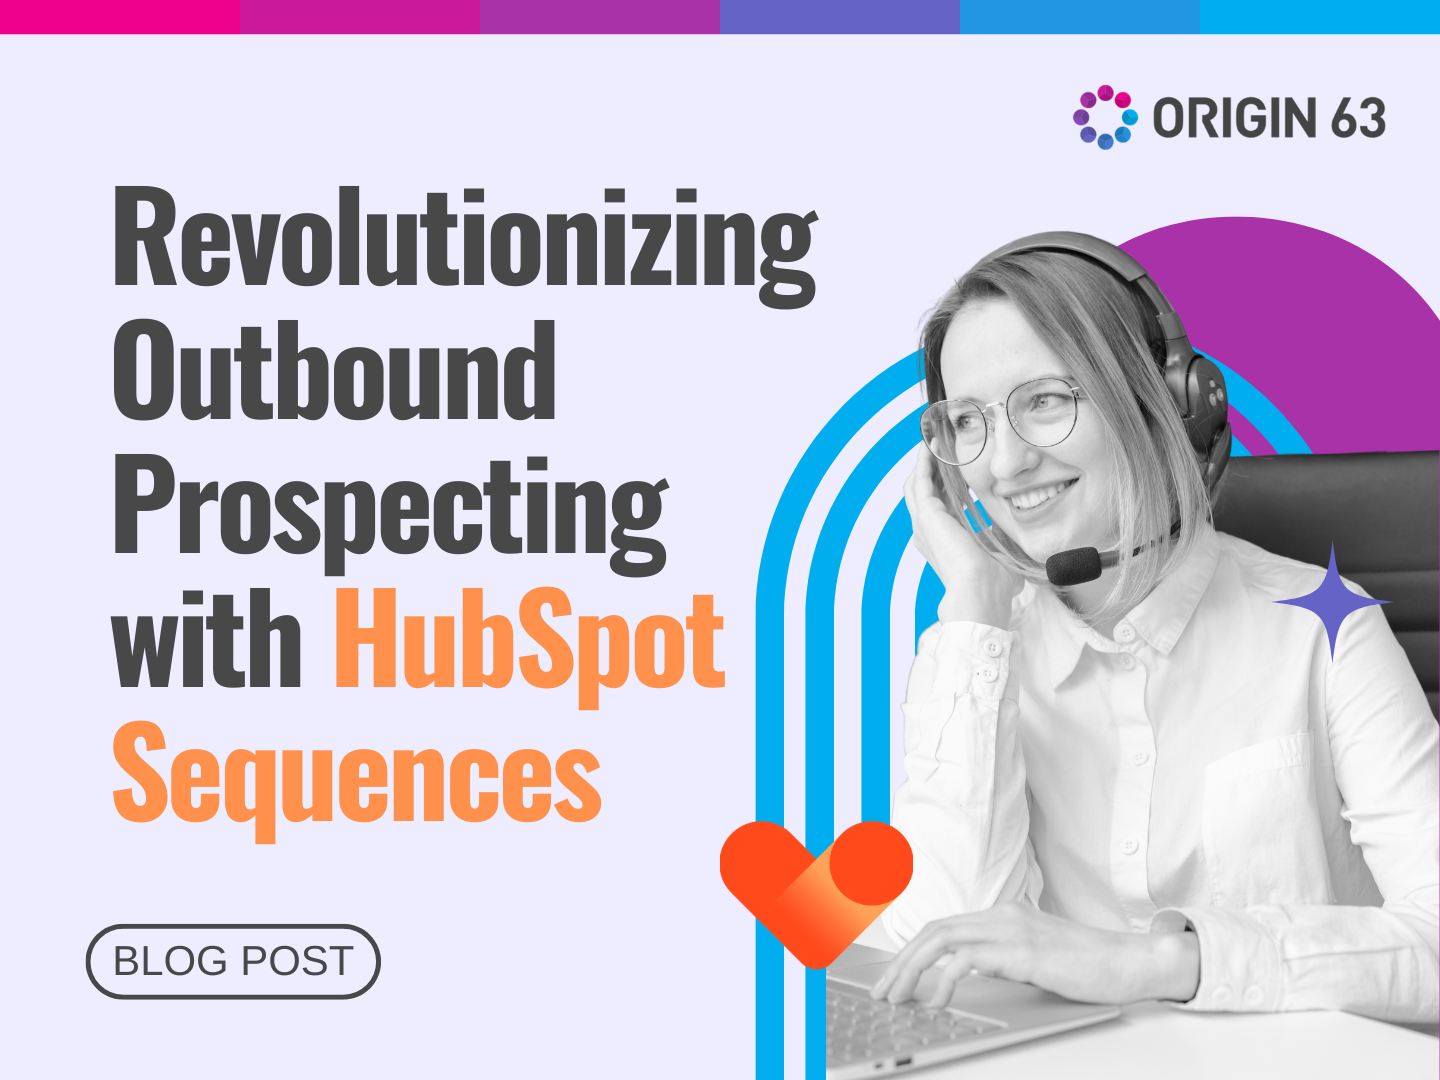 Learn how to boost outbound sales prospecting with HubSpot's latest AI tools for smarter sequences, A/B testing, and analytics.